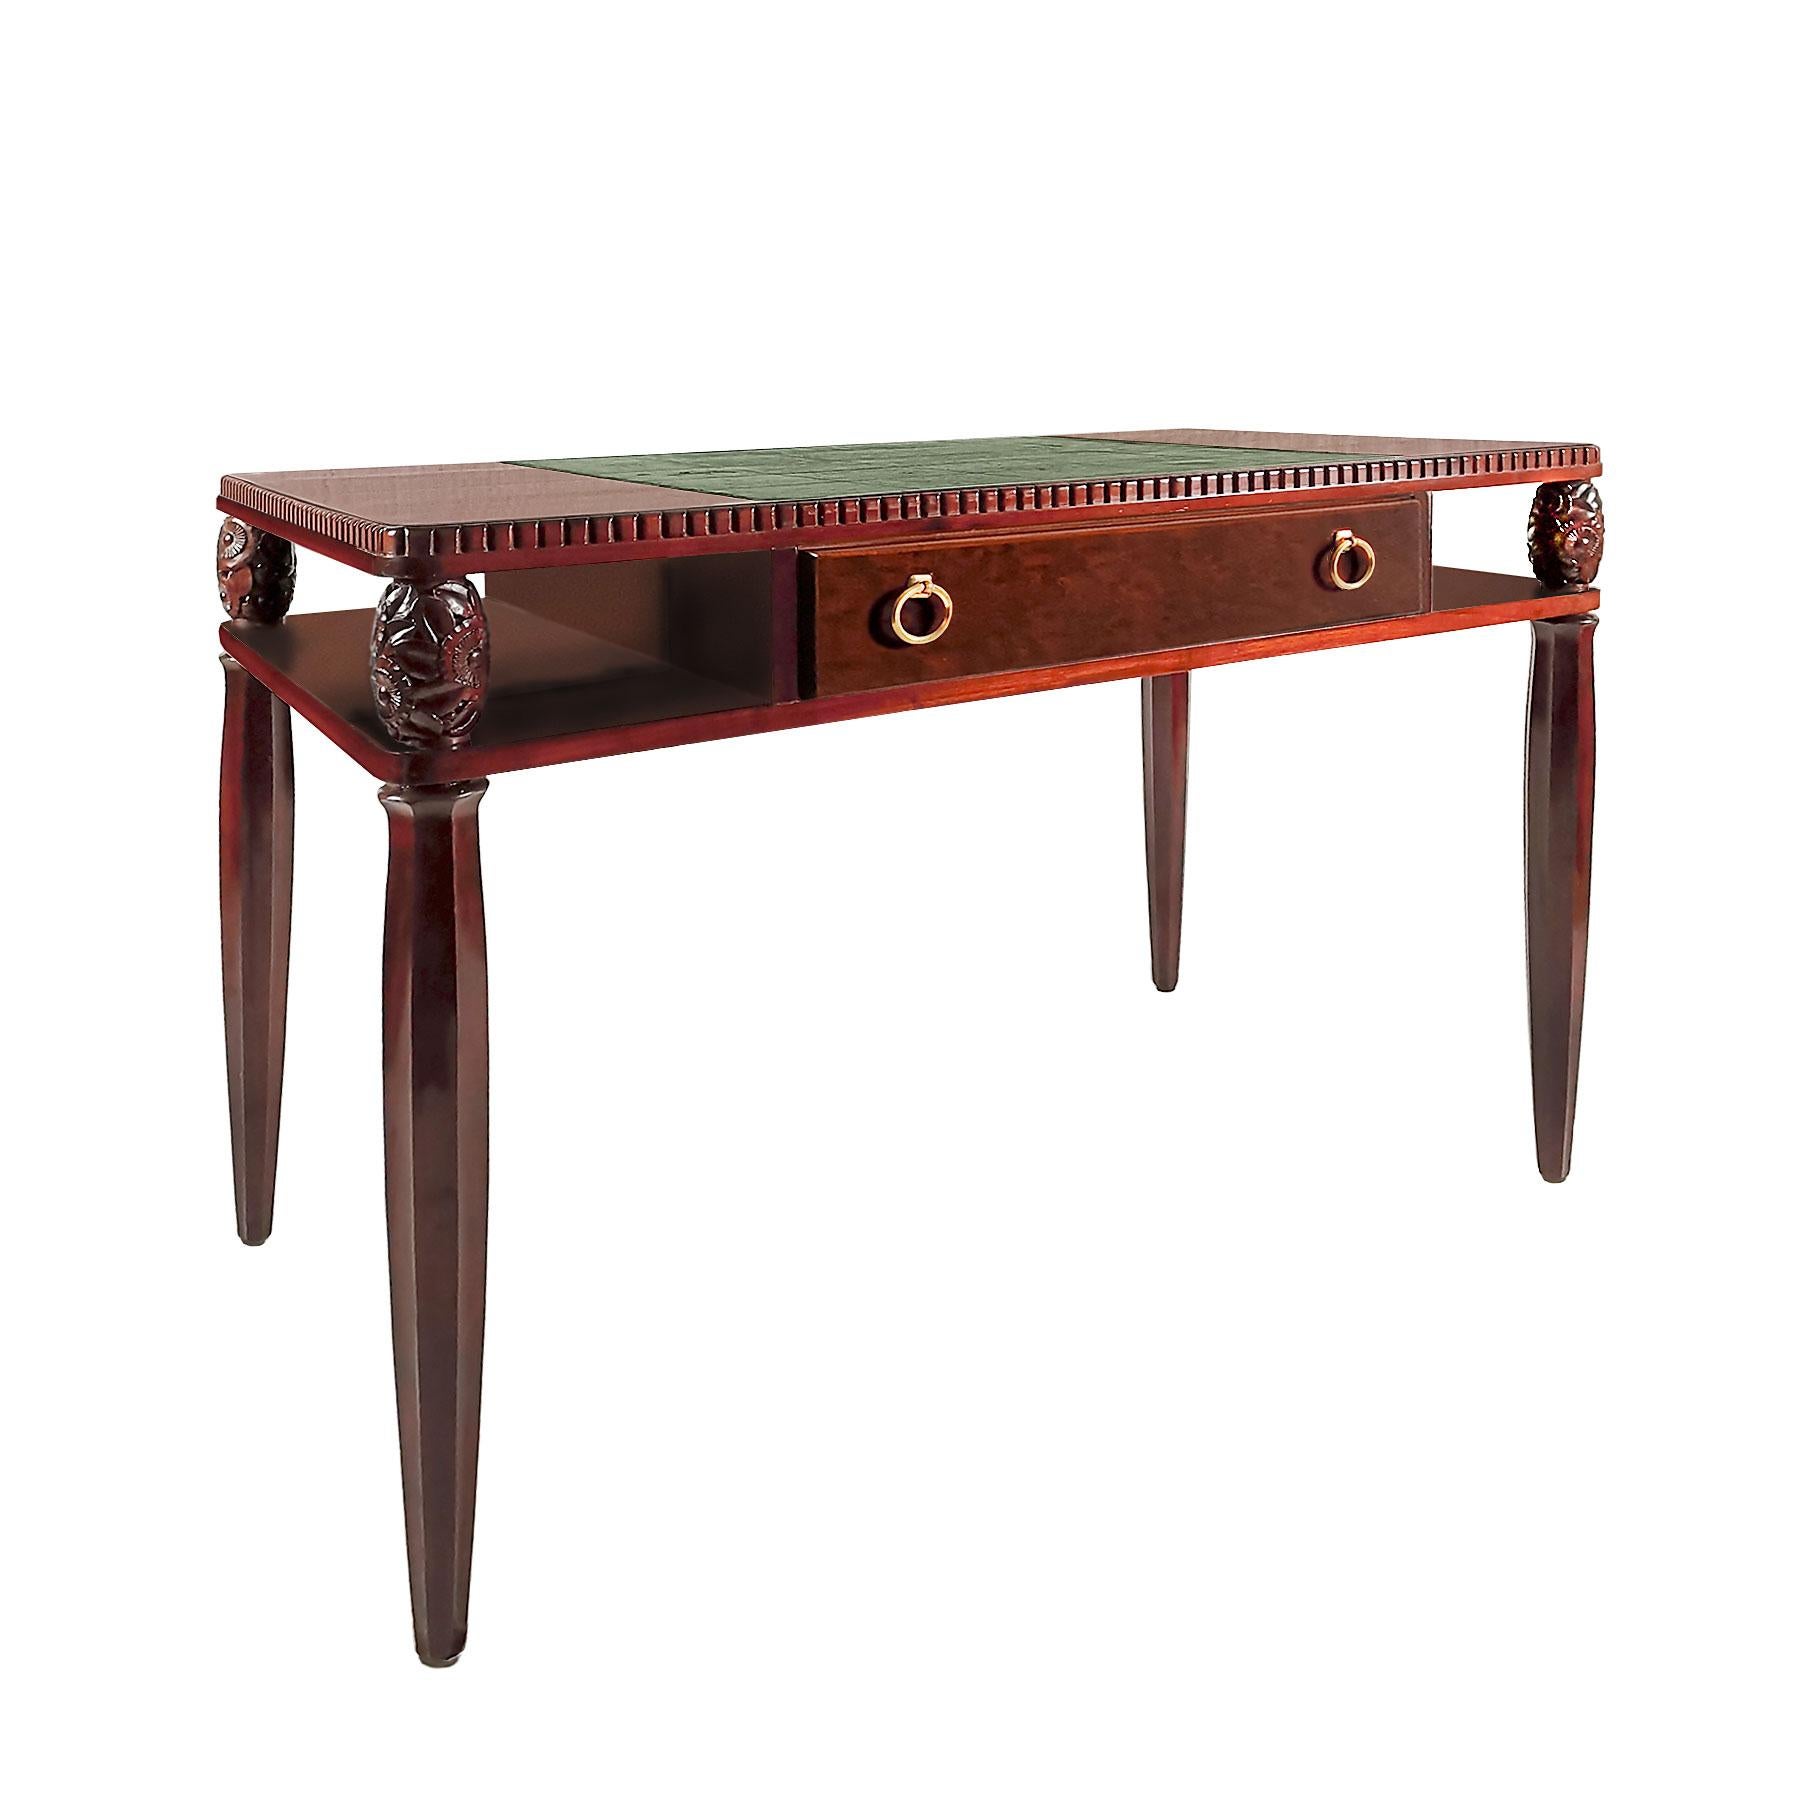 High quality Art Deco lady desk, solid mahogany and mottled mahogany veneer, faceted feet finished with four pine cones craved with floral decoration, French polish. Drawer with two polished brass handles. Top partially covered with the original